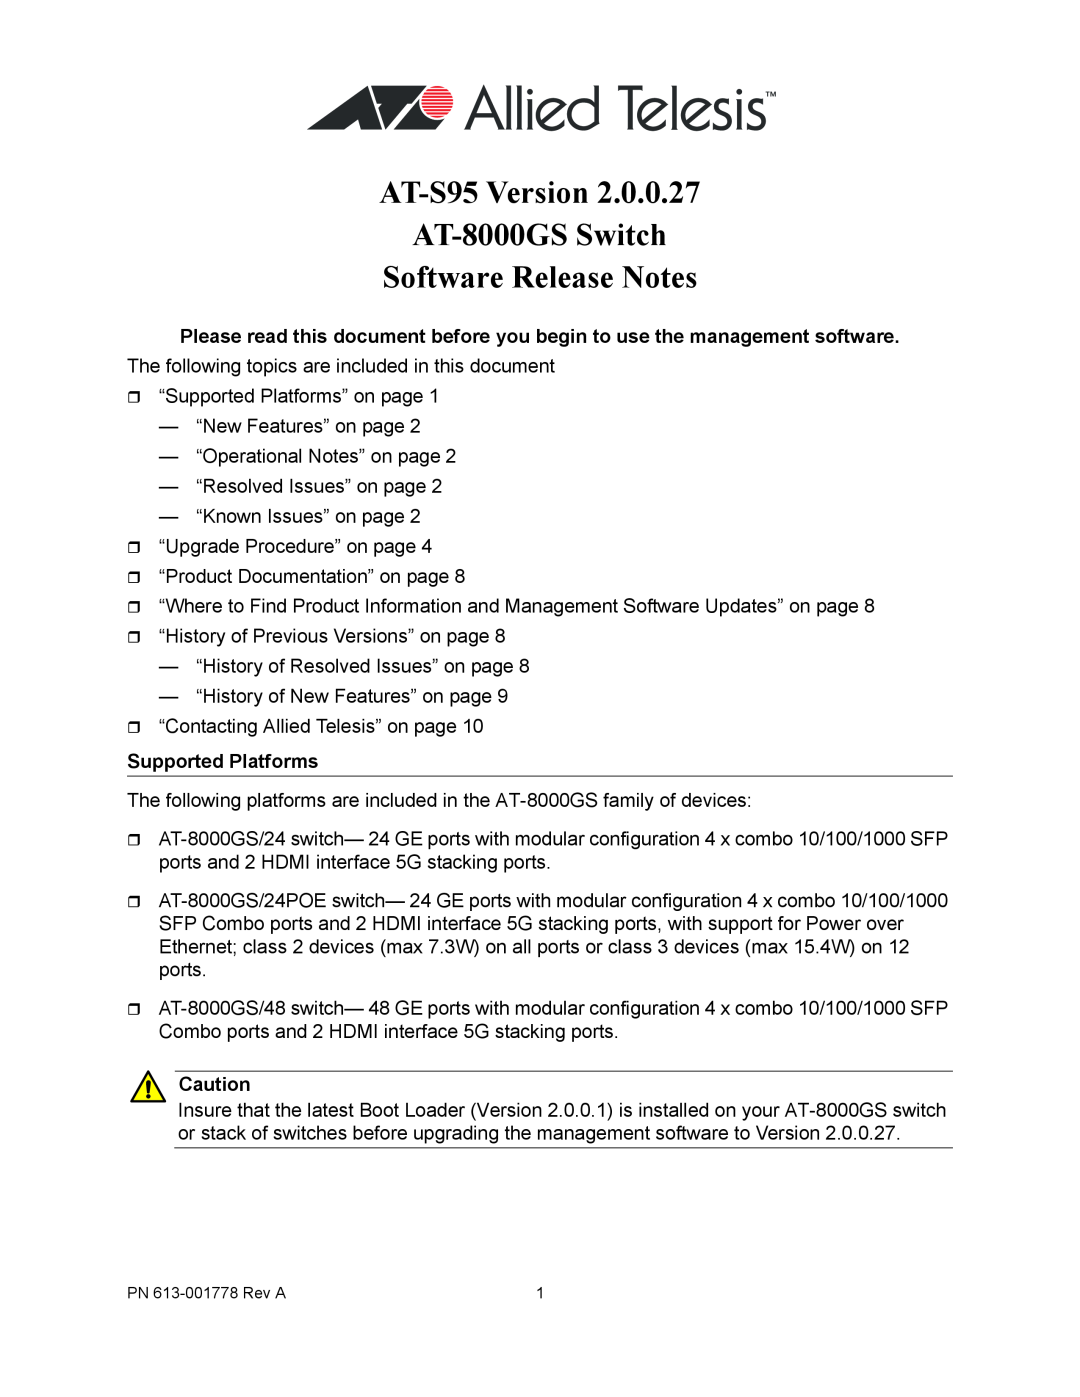 Allied Telesis manual Supported Platforms, AT-S95 Version AT-8000GS Switch Software Release Notes 